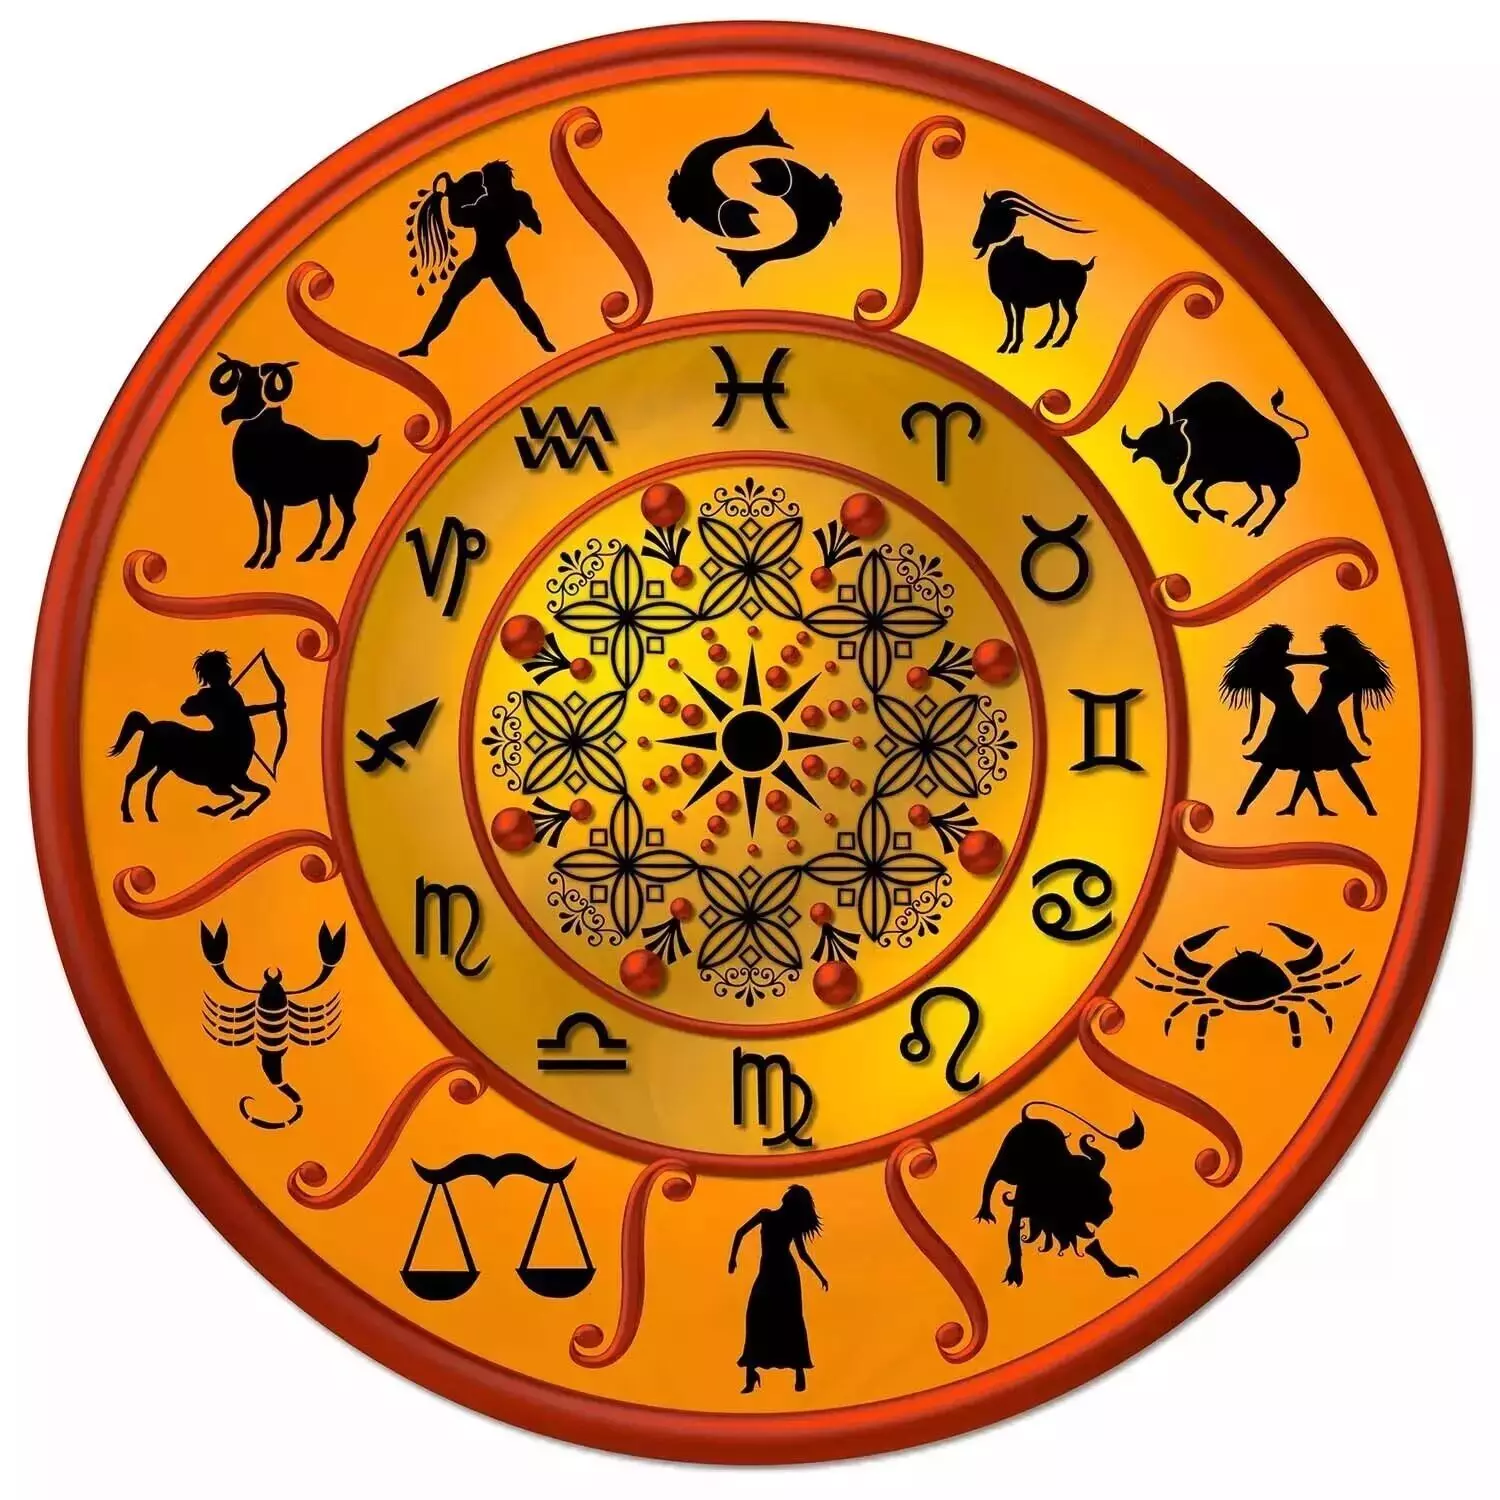 27 July  – Know your todays horoscope